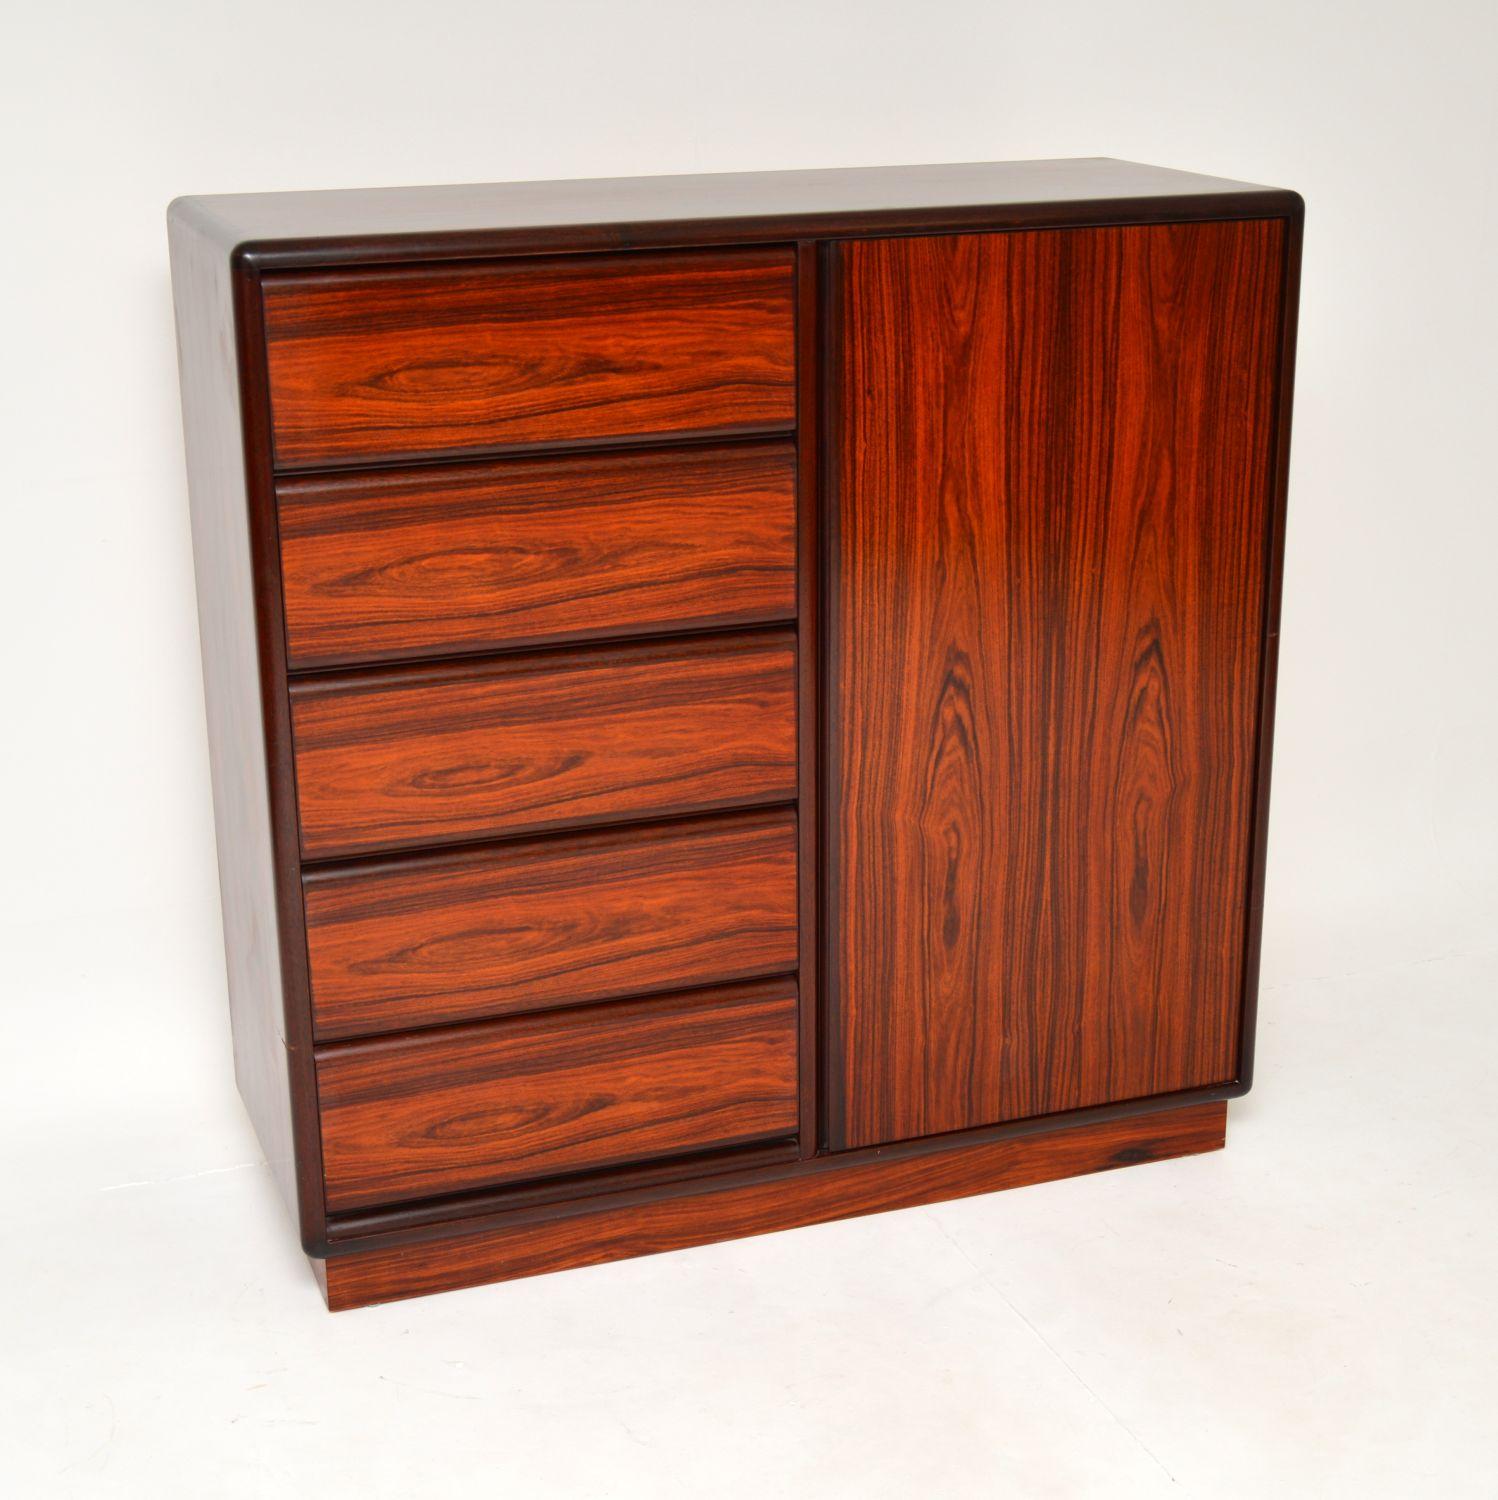 A fantastic Danish gentlemen’s wardrobe / chest of drawers by the high end manufacturer Brouer. This was made in Denmark, it dates from the 1970’s.

The quality is absolutely outstanding, this is very well built and very heavy! It has stunning